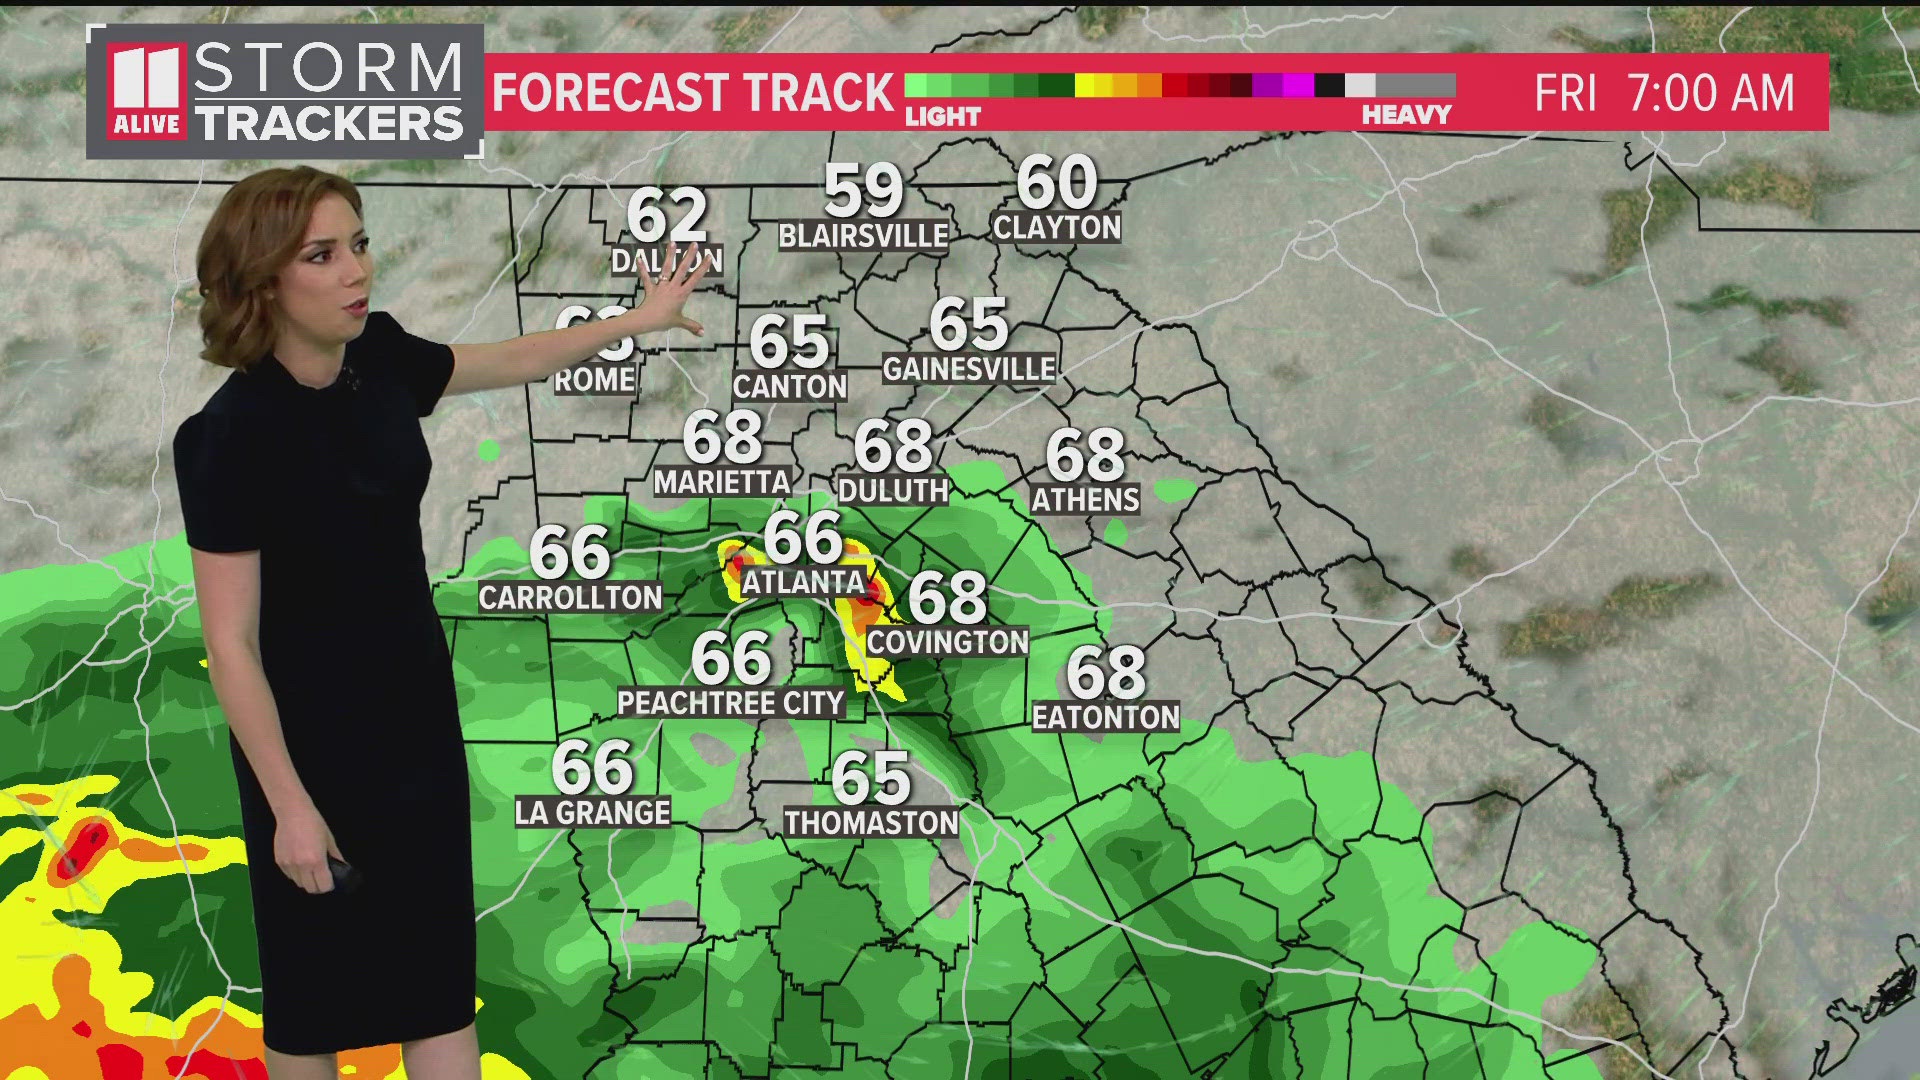 Showers and storms are possible early Friday, mainly south of I-20